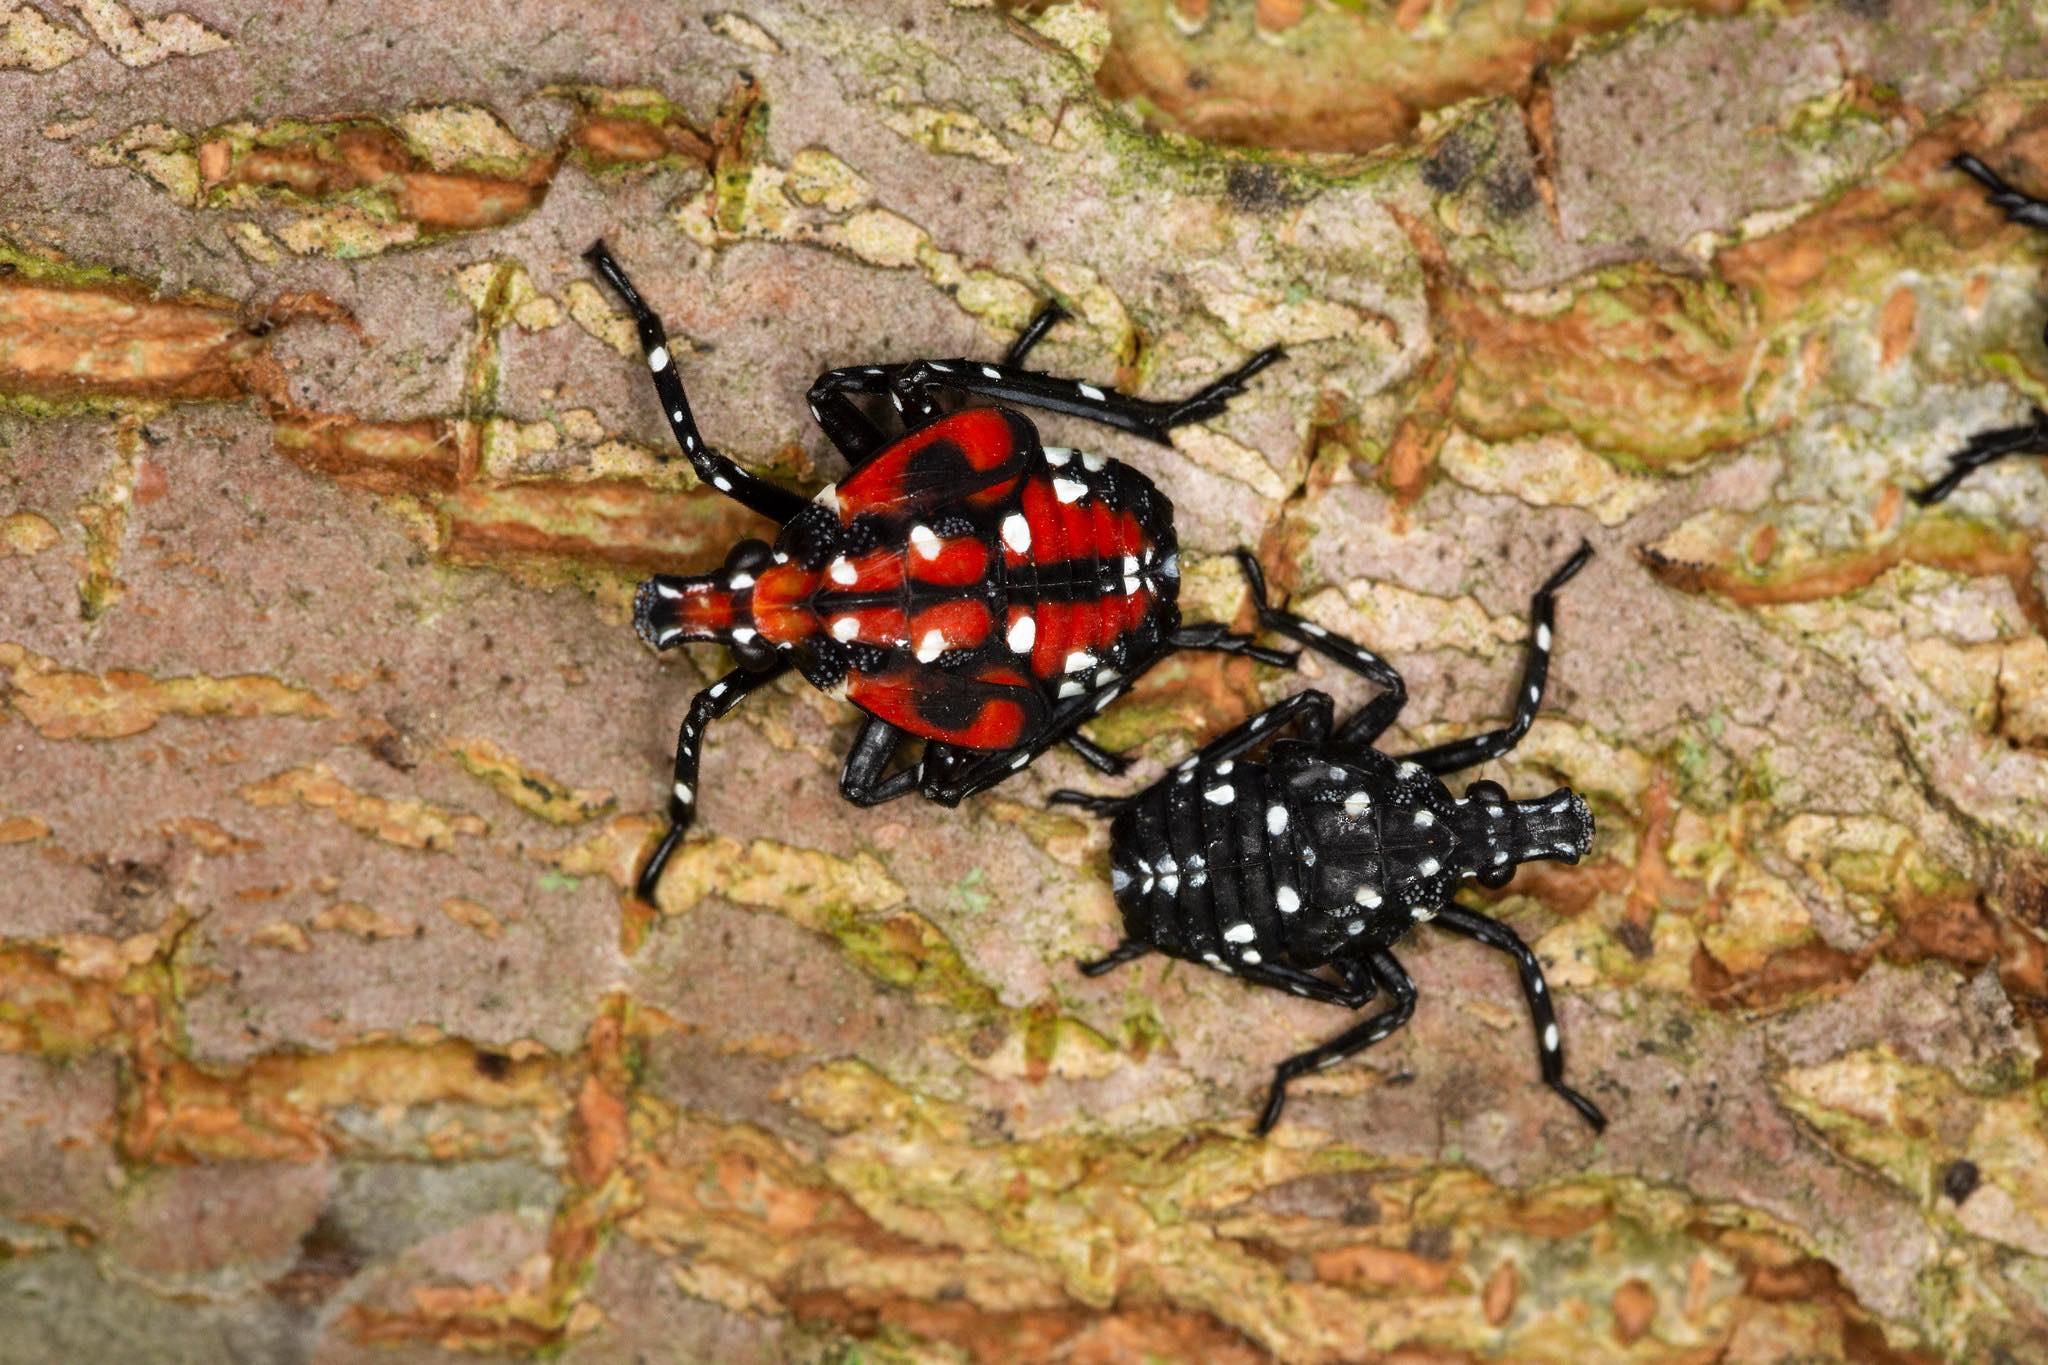 Spotted lanternfly nymphs are red in their final stage and black in their earlier stages. (U.S. Department of Agriculture)